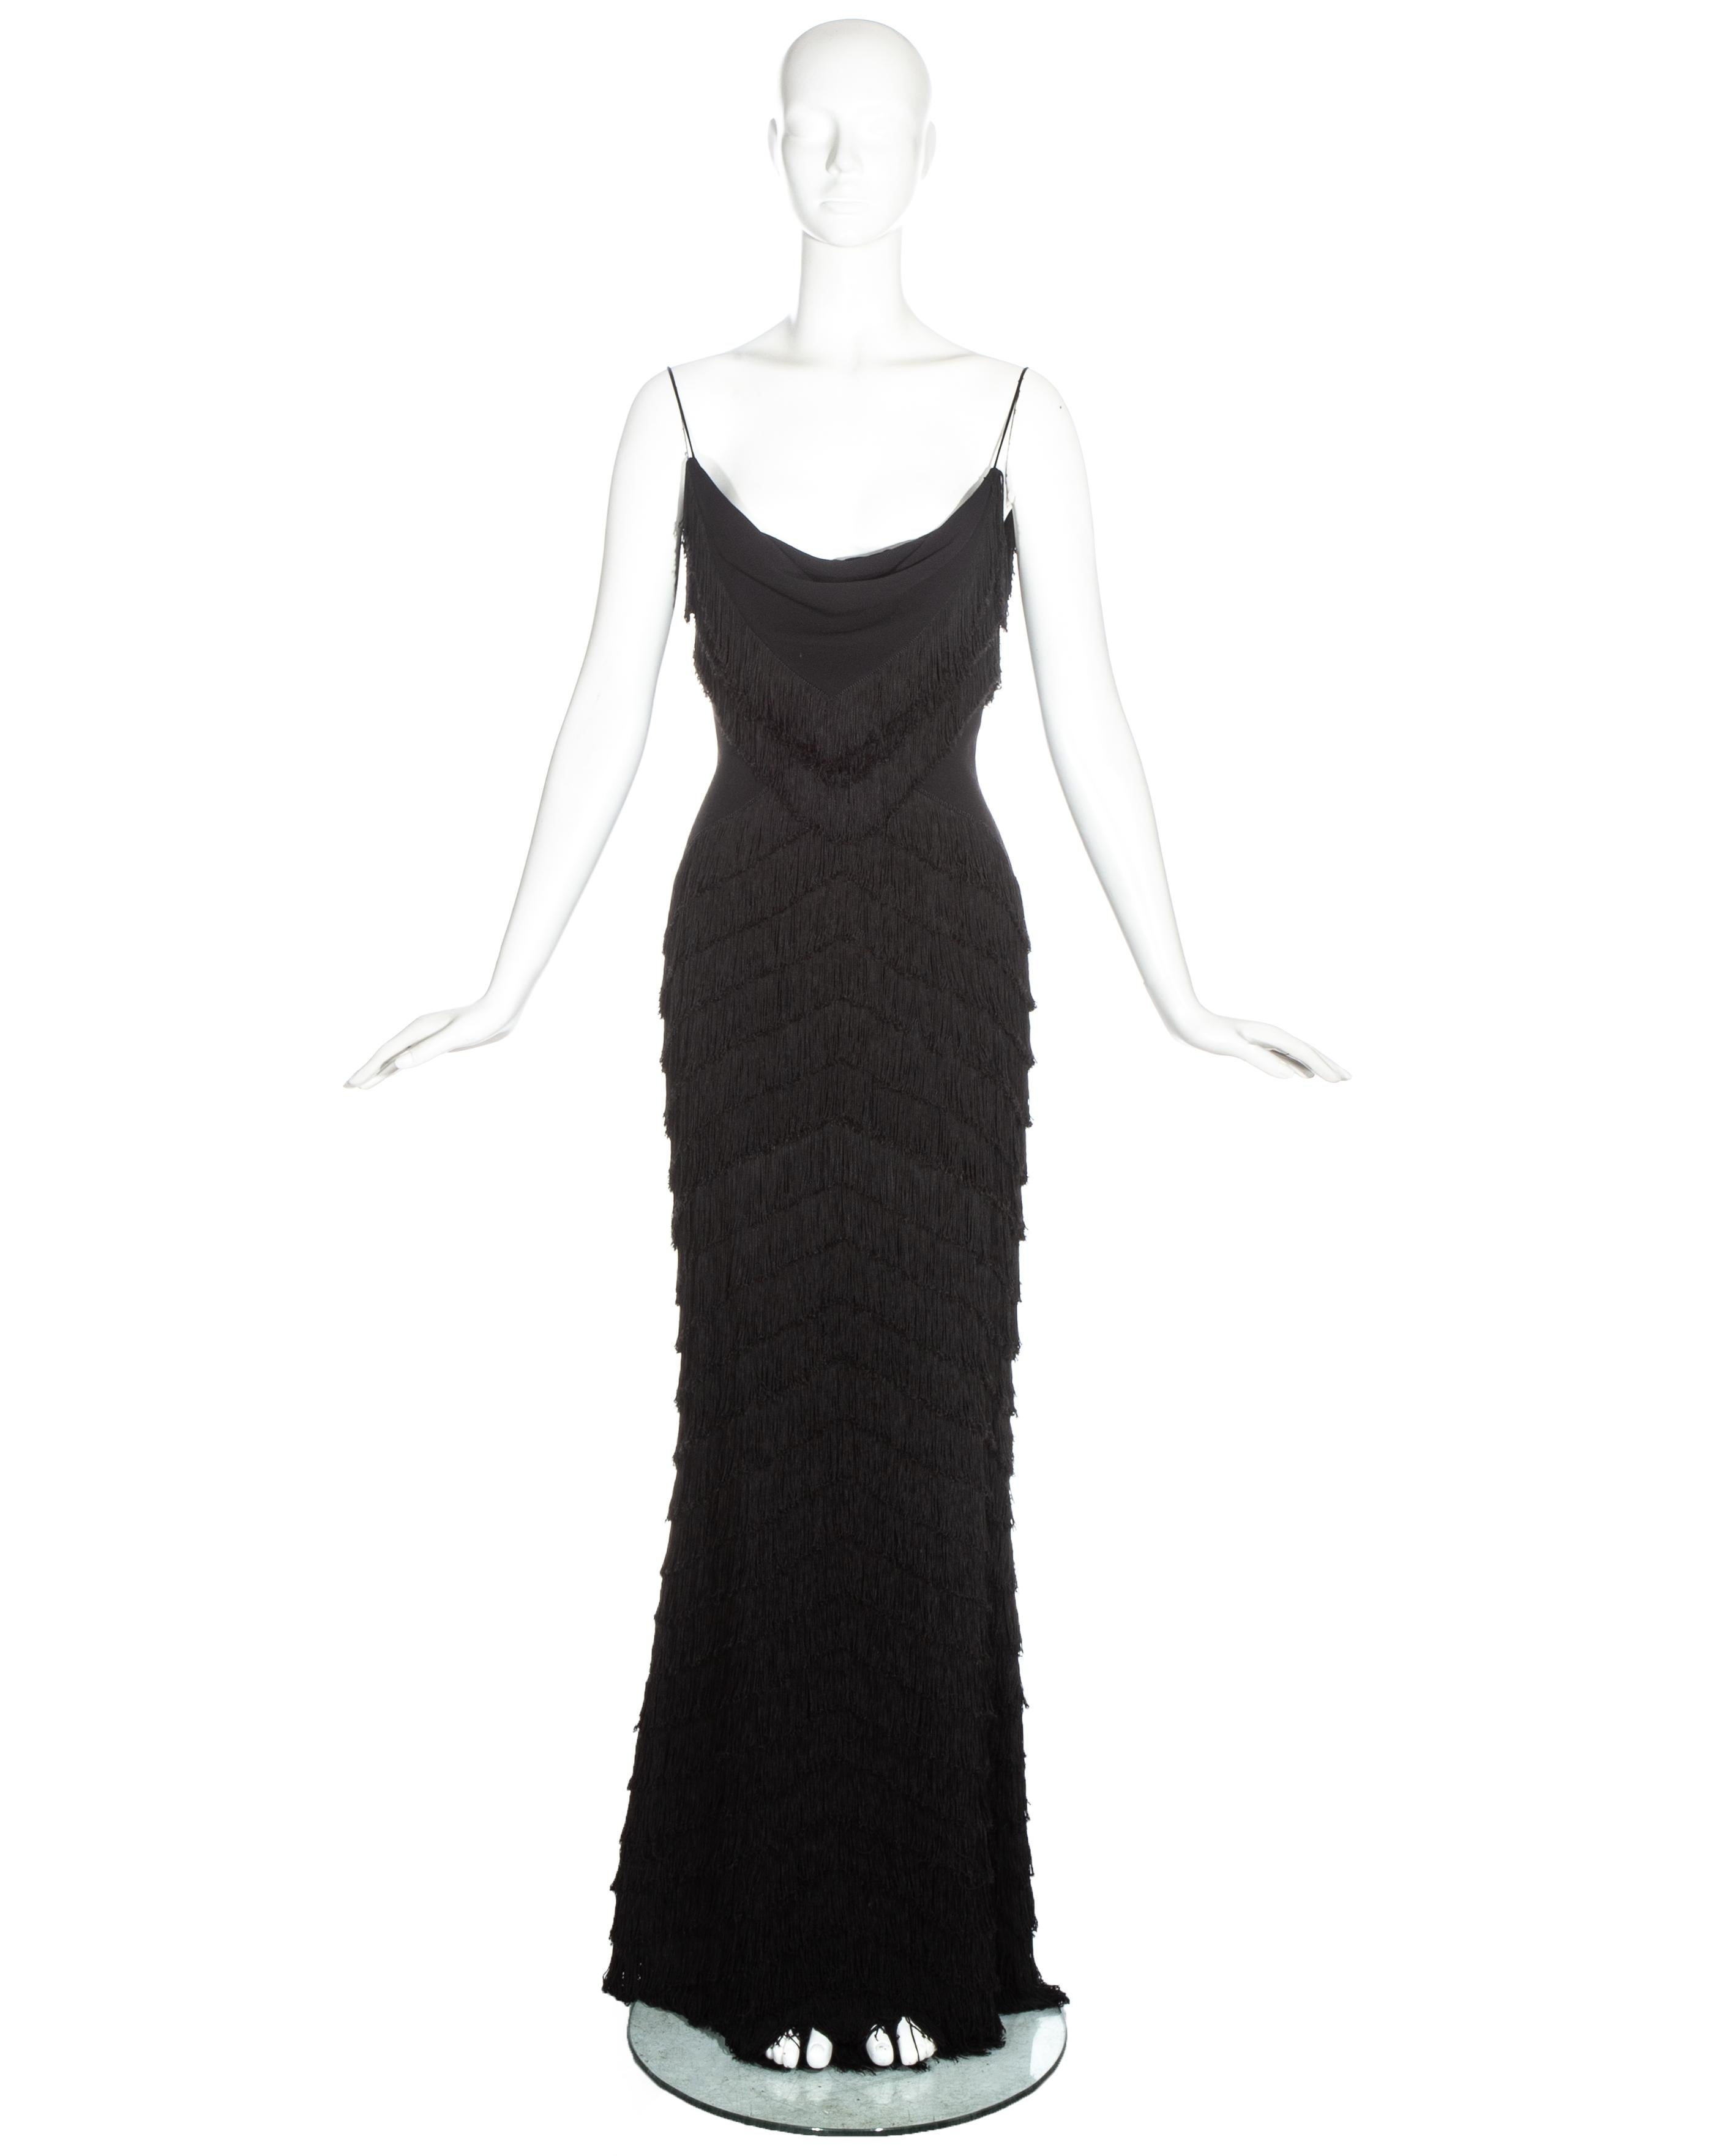 Christian Dior by John Galliano black silk fringed evening dress with spaghetti straps and silk lining.

Spring-Summer 1998